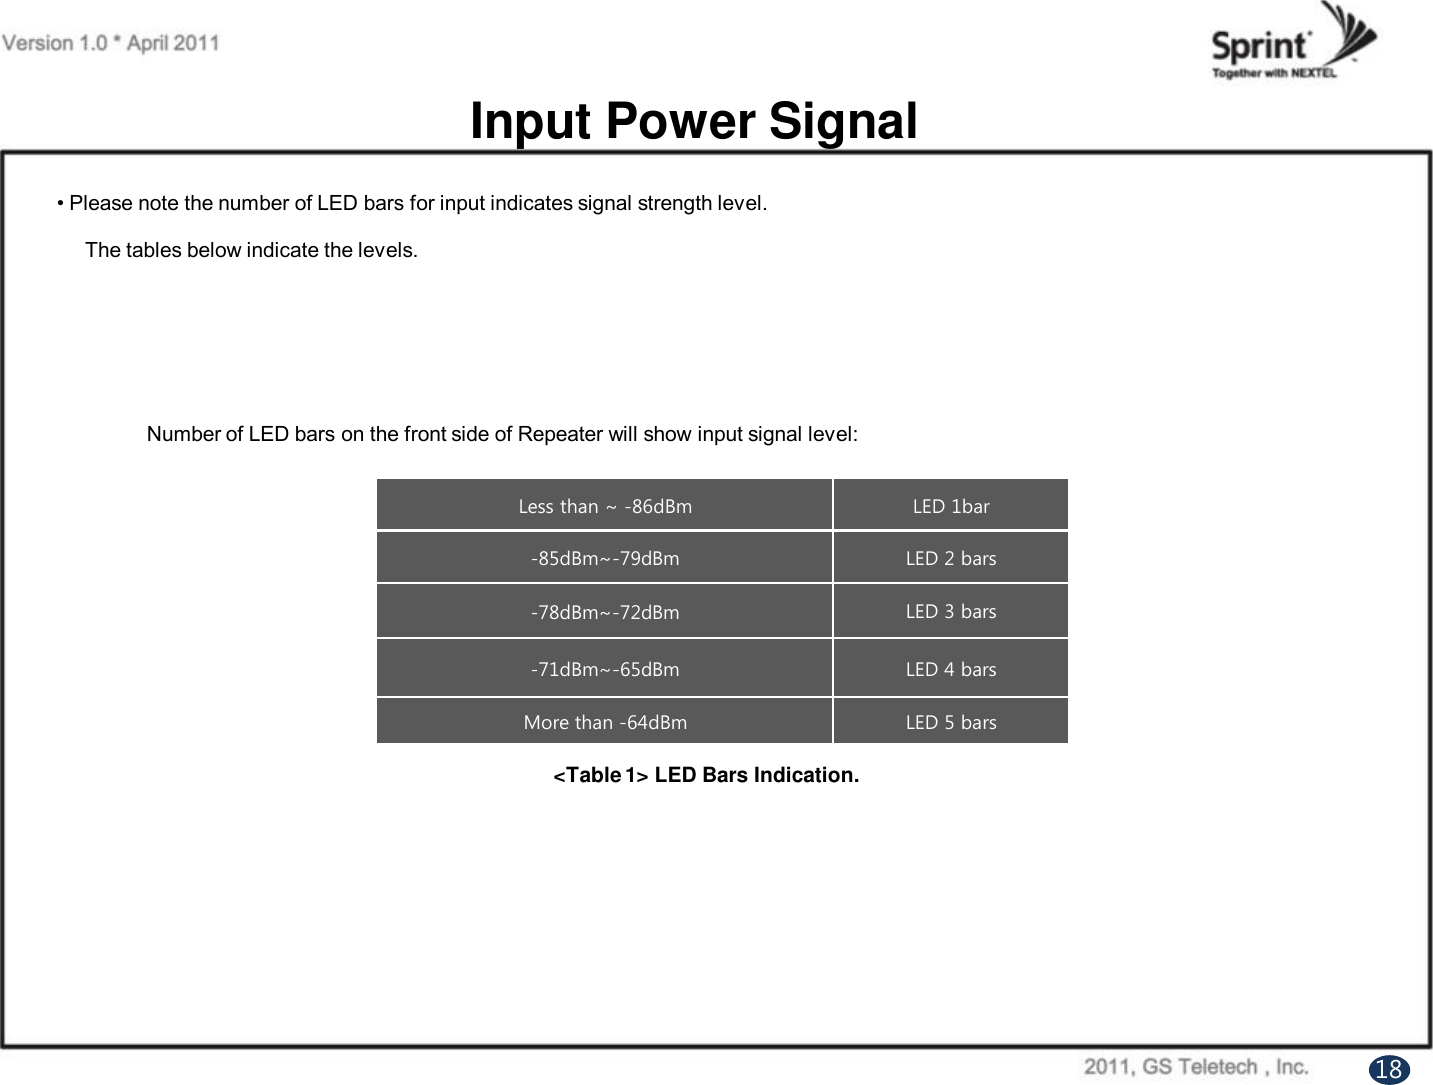 Input Power Signal• Please note the number of LED bars for input indicates signal strength level.The tables below indicate the levels.Number of LED bars on the front side of Repeater will show input signal level:Less than ~ -86dBmLED 1bar-85dBm~-79dBmLED 2 bars-78dBm~-72dBmLED 3 bars-71dBm~-65dBmLED 4 barsMore than -64dBmLED 5 bars&lt;Table 1&gt; LED Bars Indication. 18